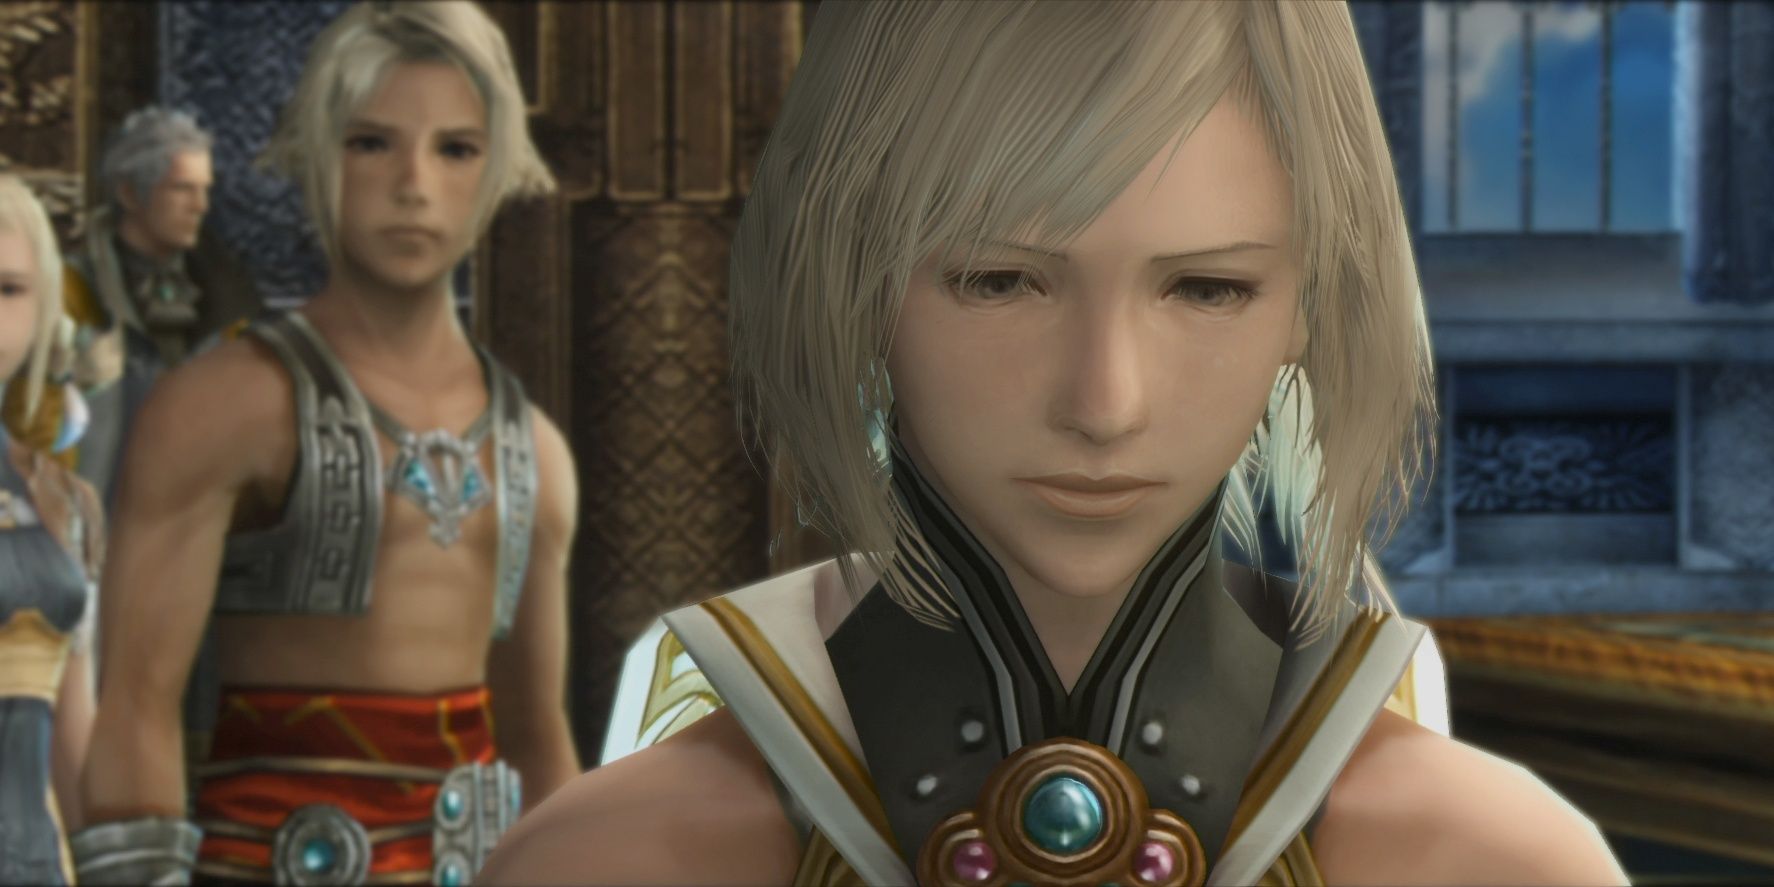 Ashe and Vaan from Final Fantasy 12